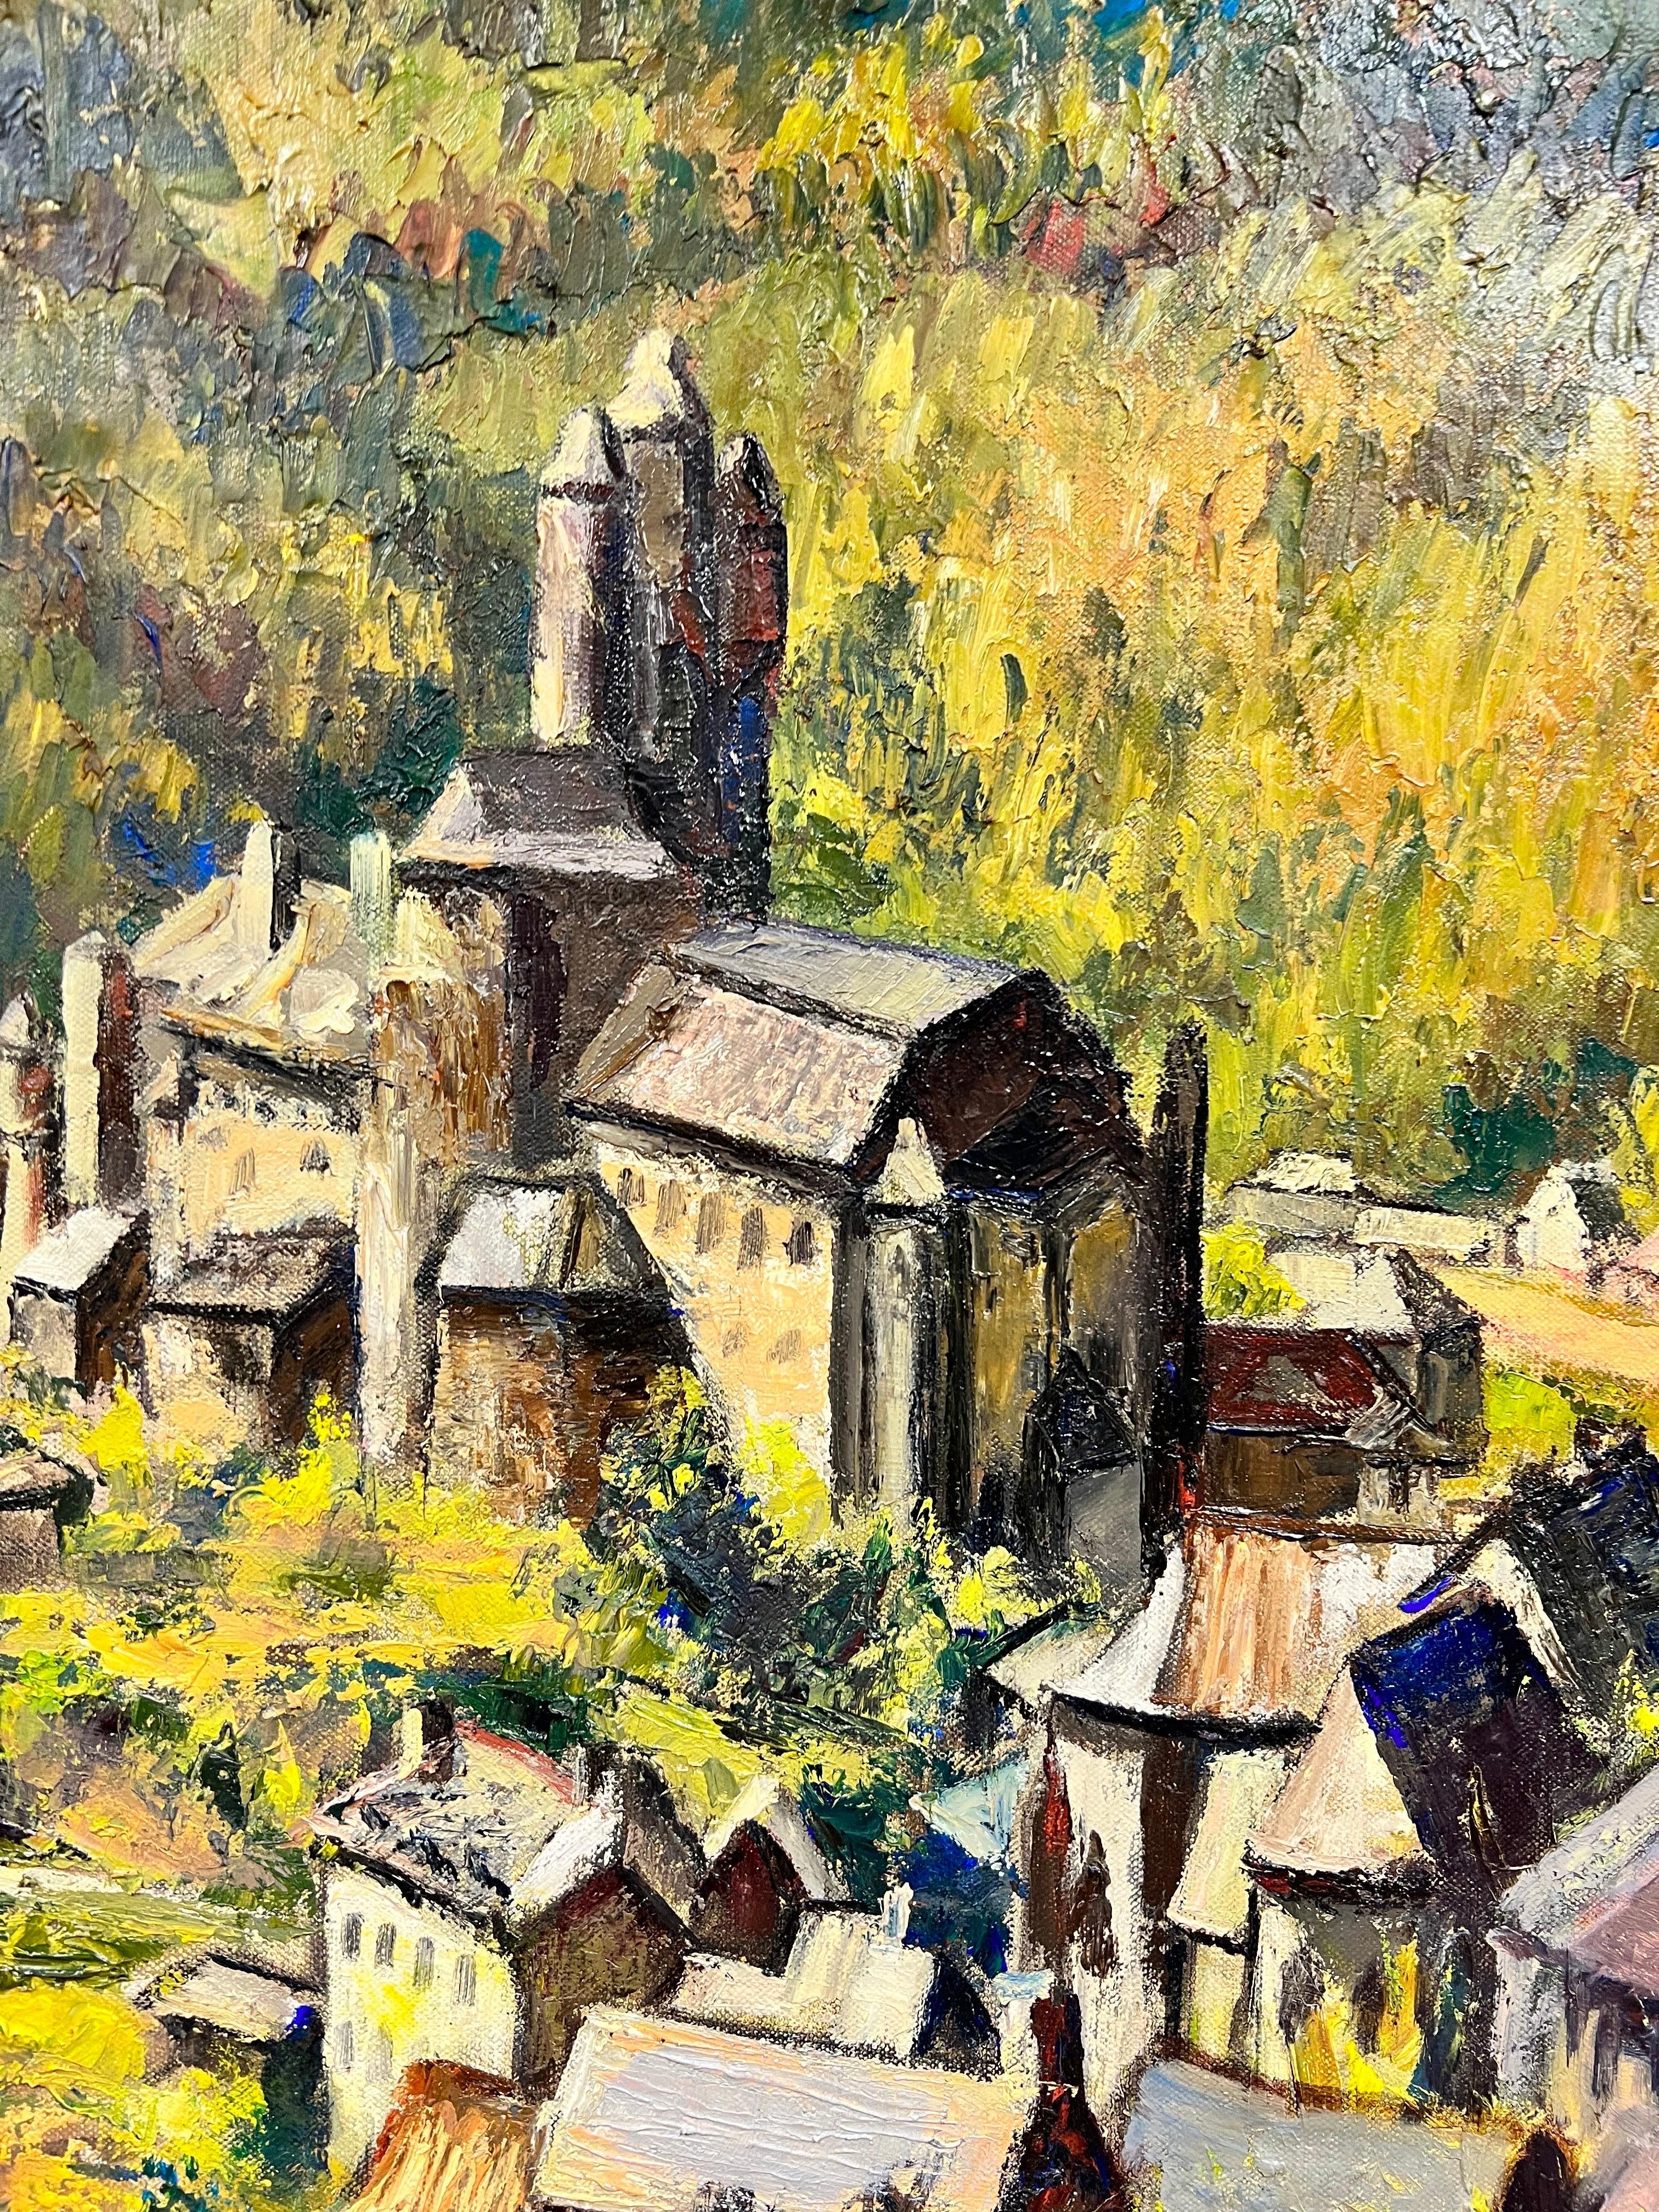 The Mountain Top Village
by Josine Vignon (French 1922-2022)
signed 
oil painting on canvas, framed
framed: 38 x 27 inches
canvas: 25 x 26 inches

Colors: Green colors, yellow, black, red and grey

Very good condition, slight loose fitting in its